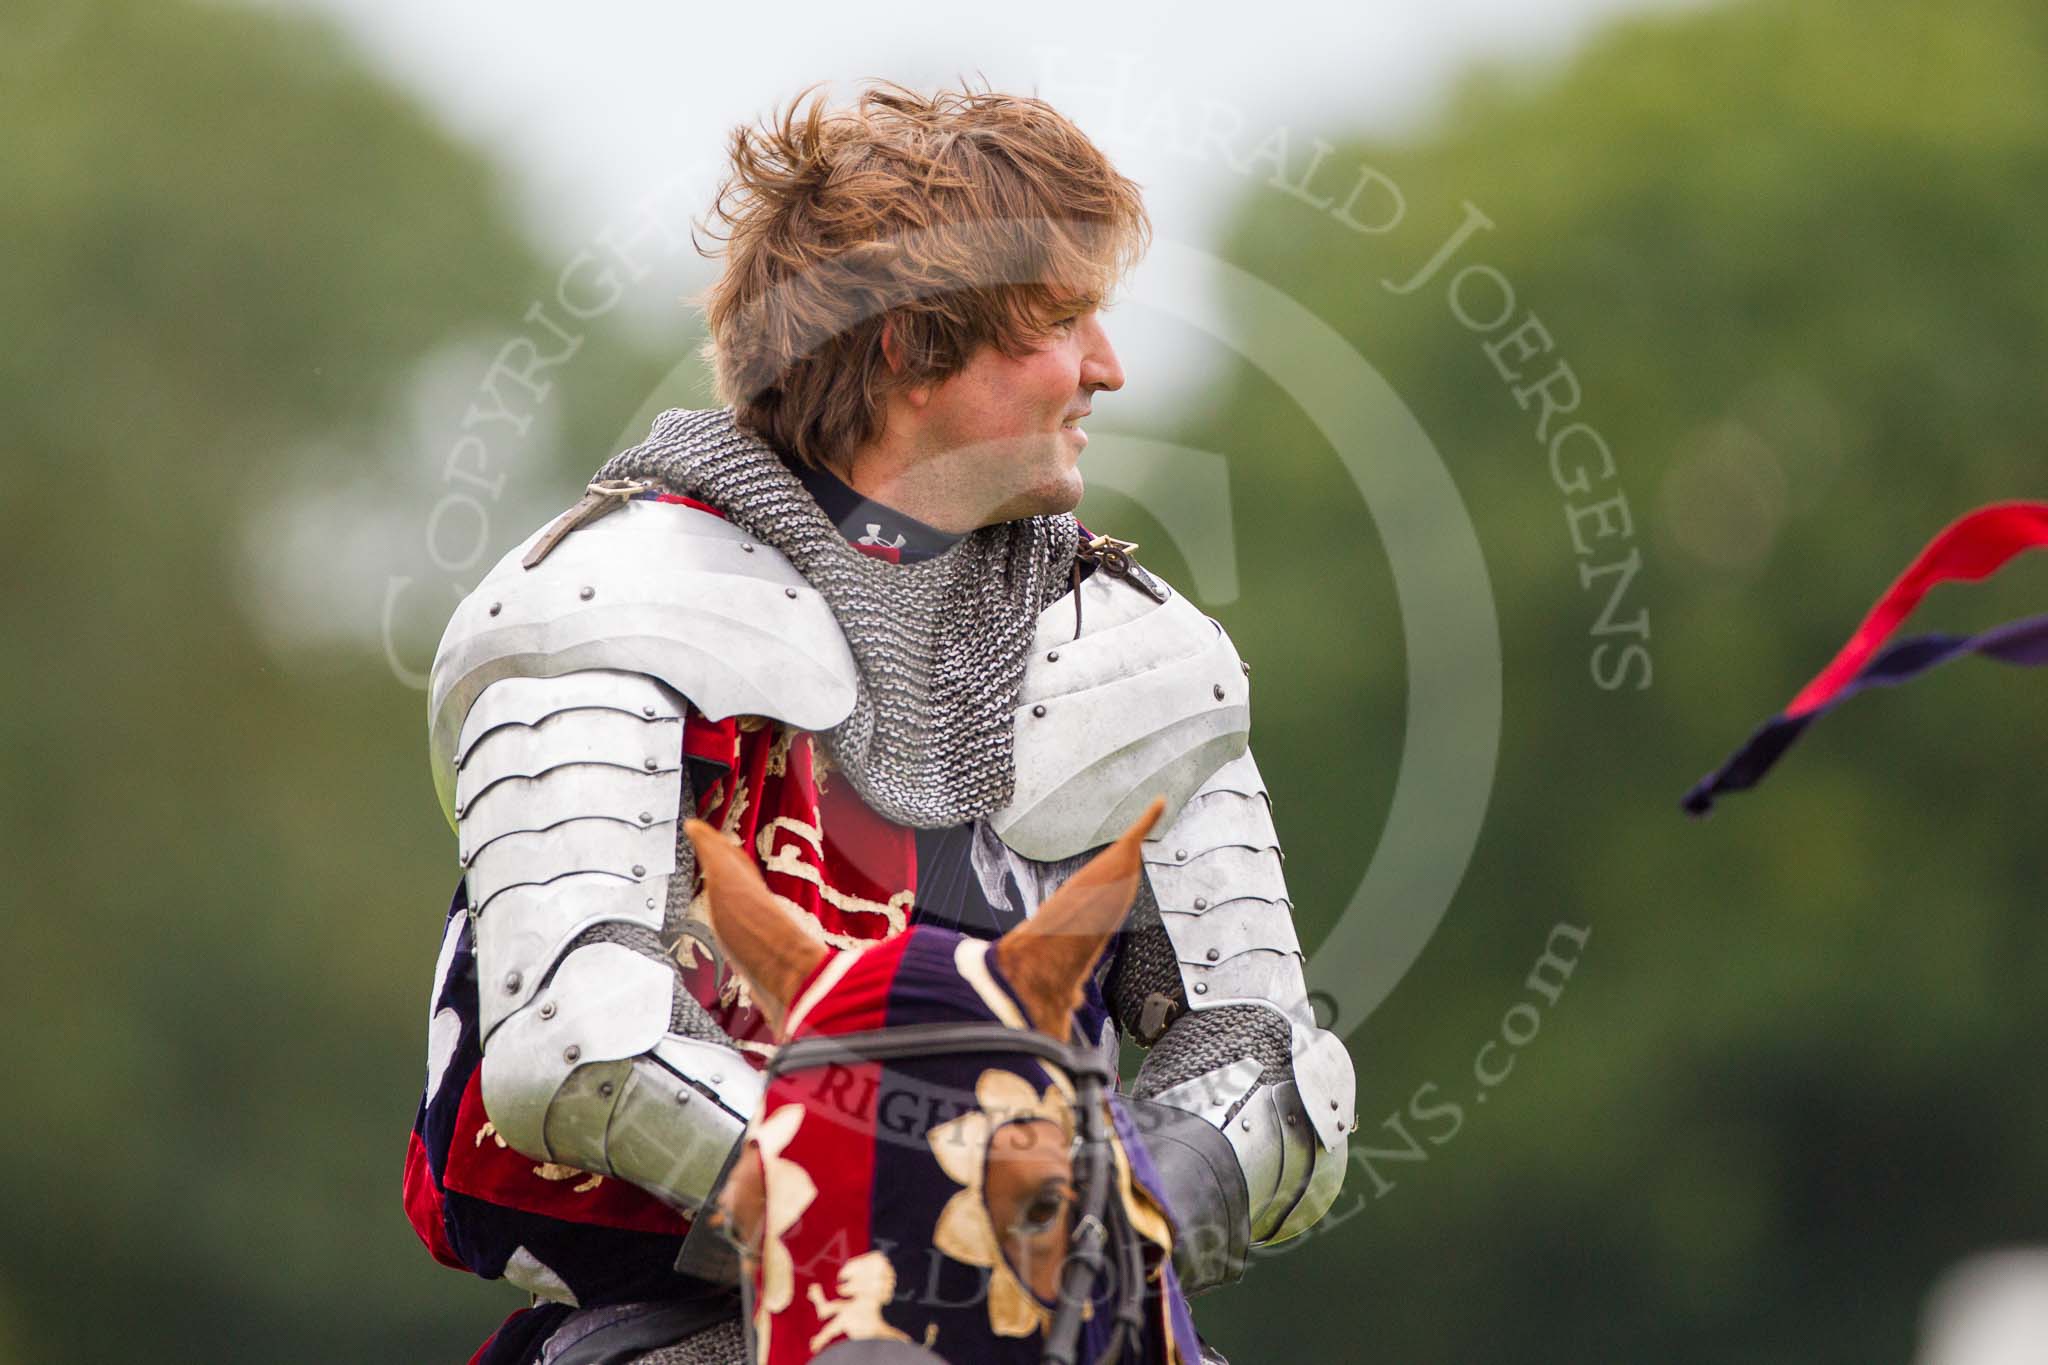 DBPC Polo in the Park 2012: The Knights of Middle England and their Jousting display..
Dallas Burston Polo Club,
Stoneythorpe Estate,
Southam,
Warwickshire,
United Kingdom,
on 16 September 2012 at 14:20, image #184